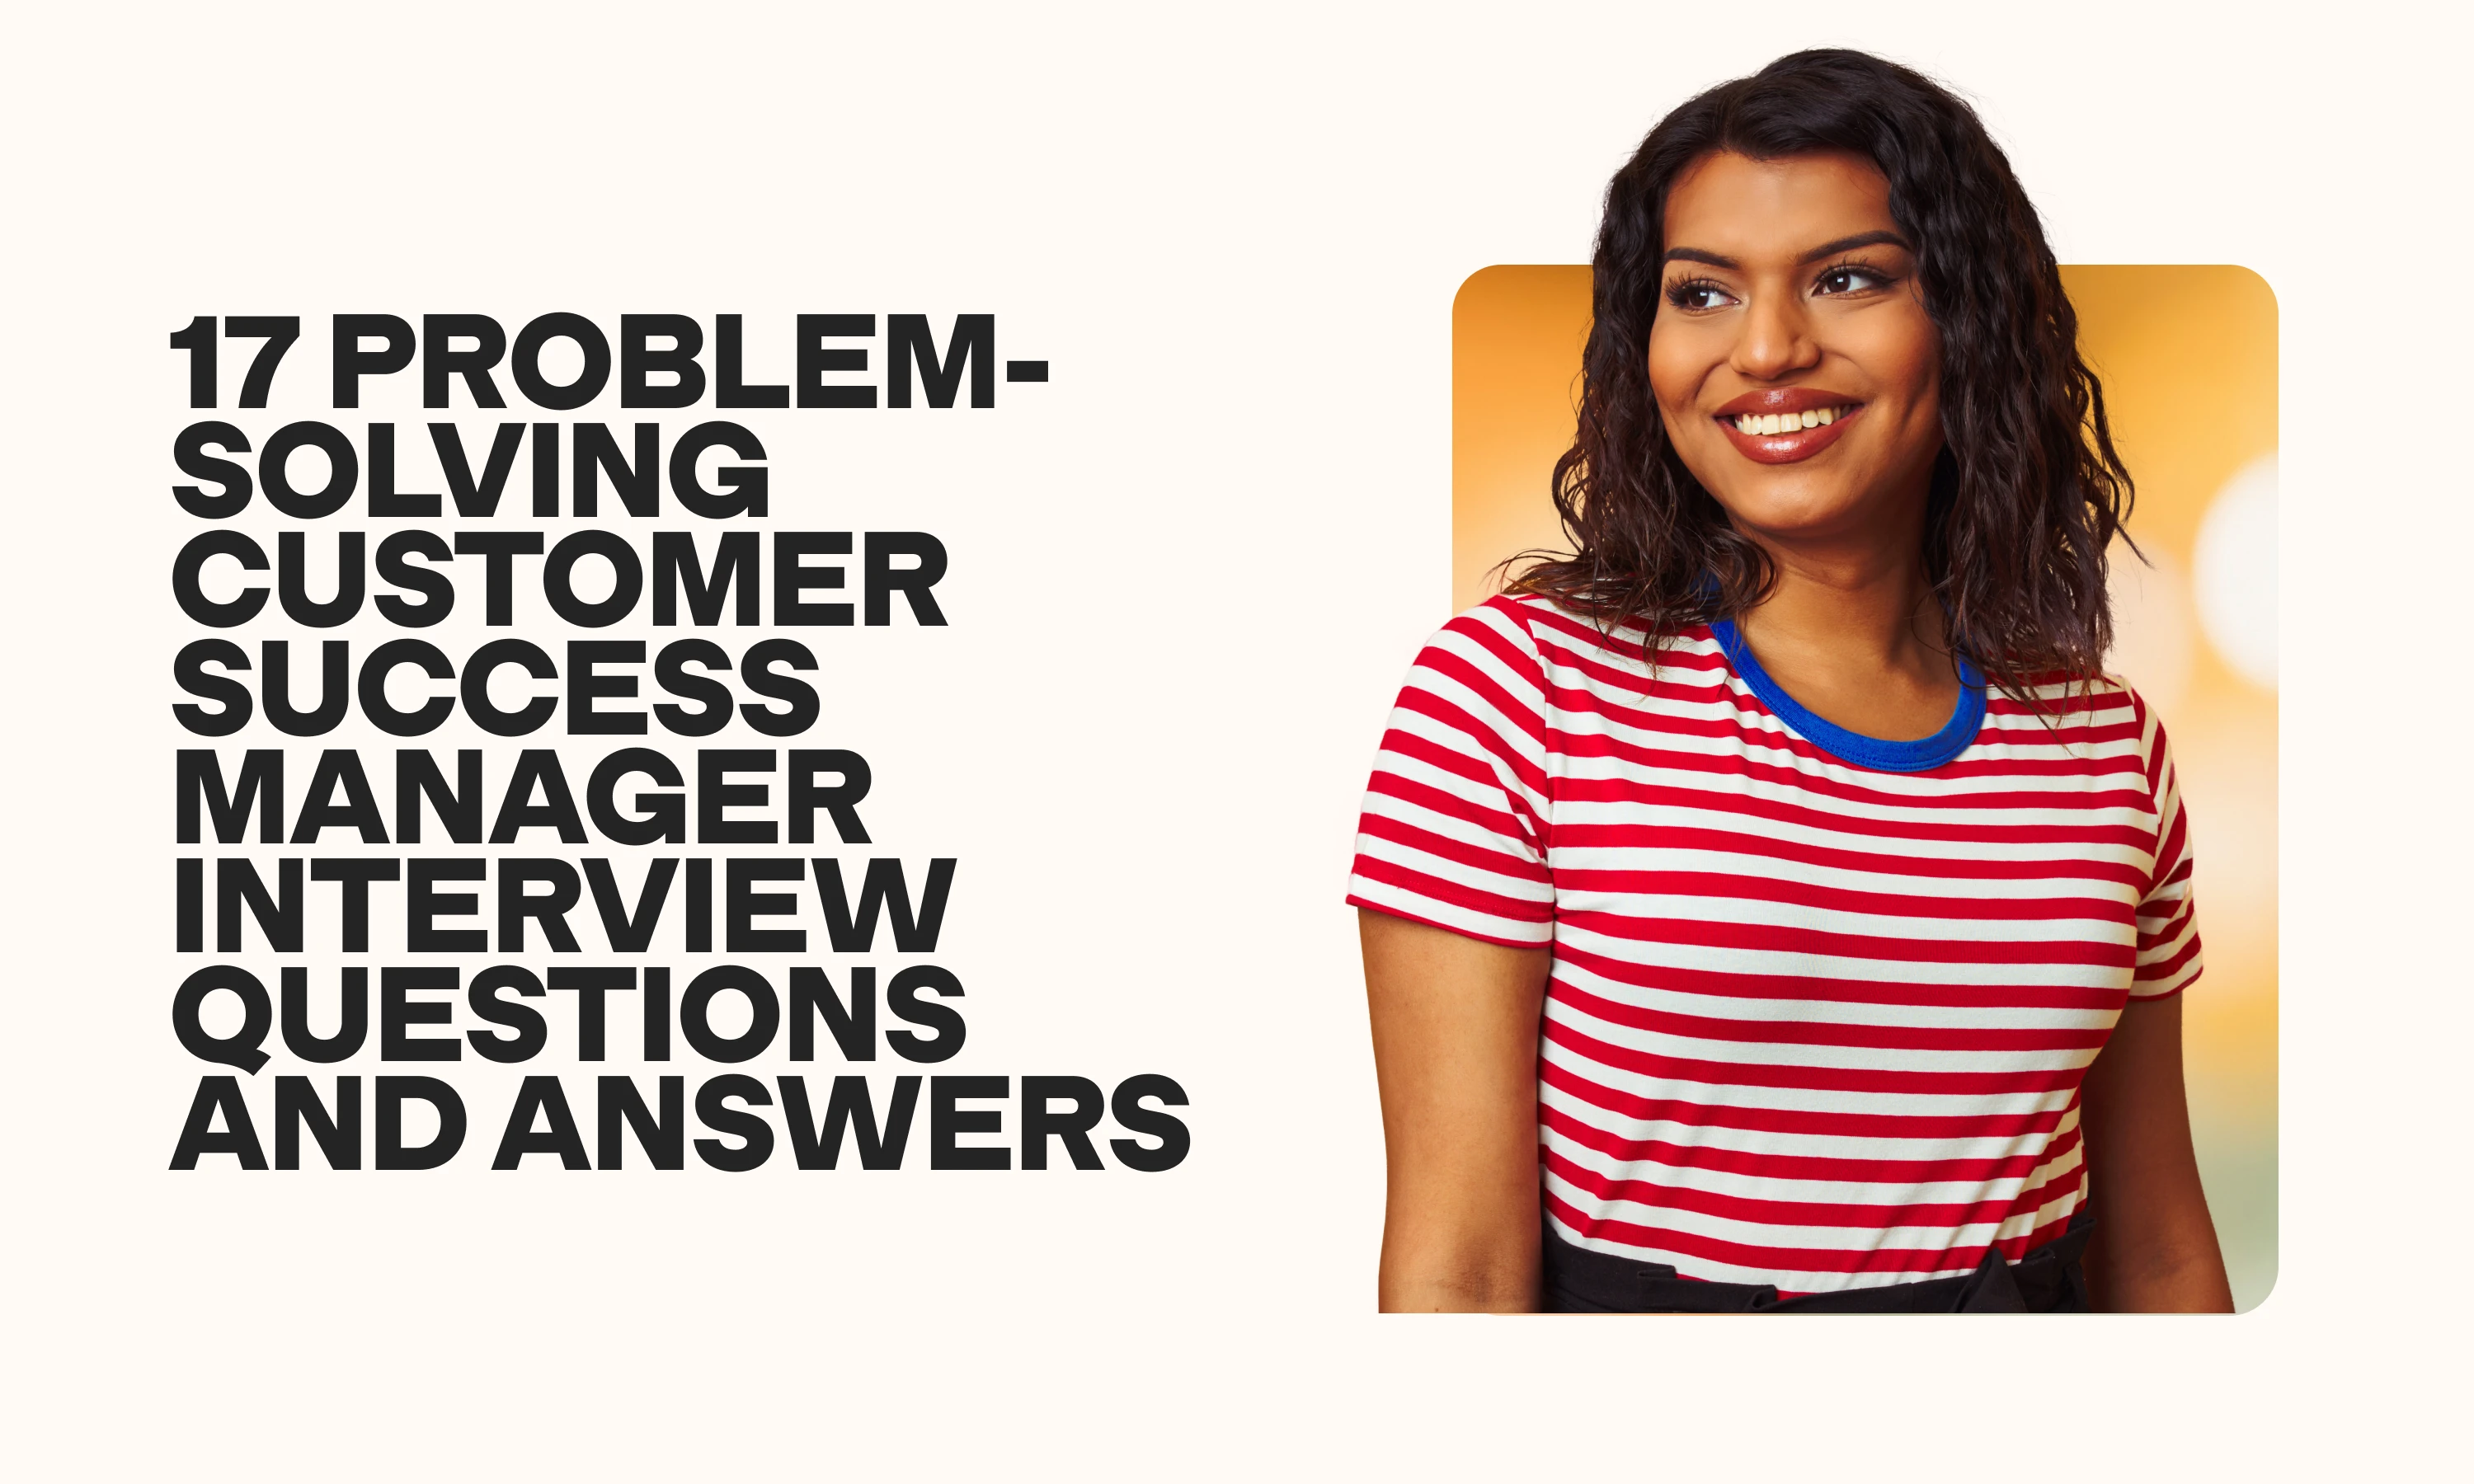 image showing problem solving customer success manager interview questions and answers